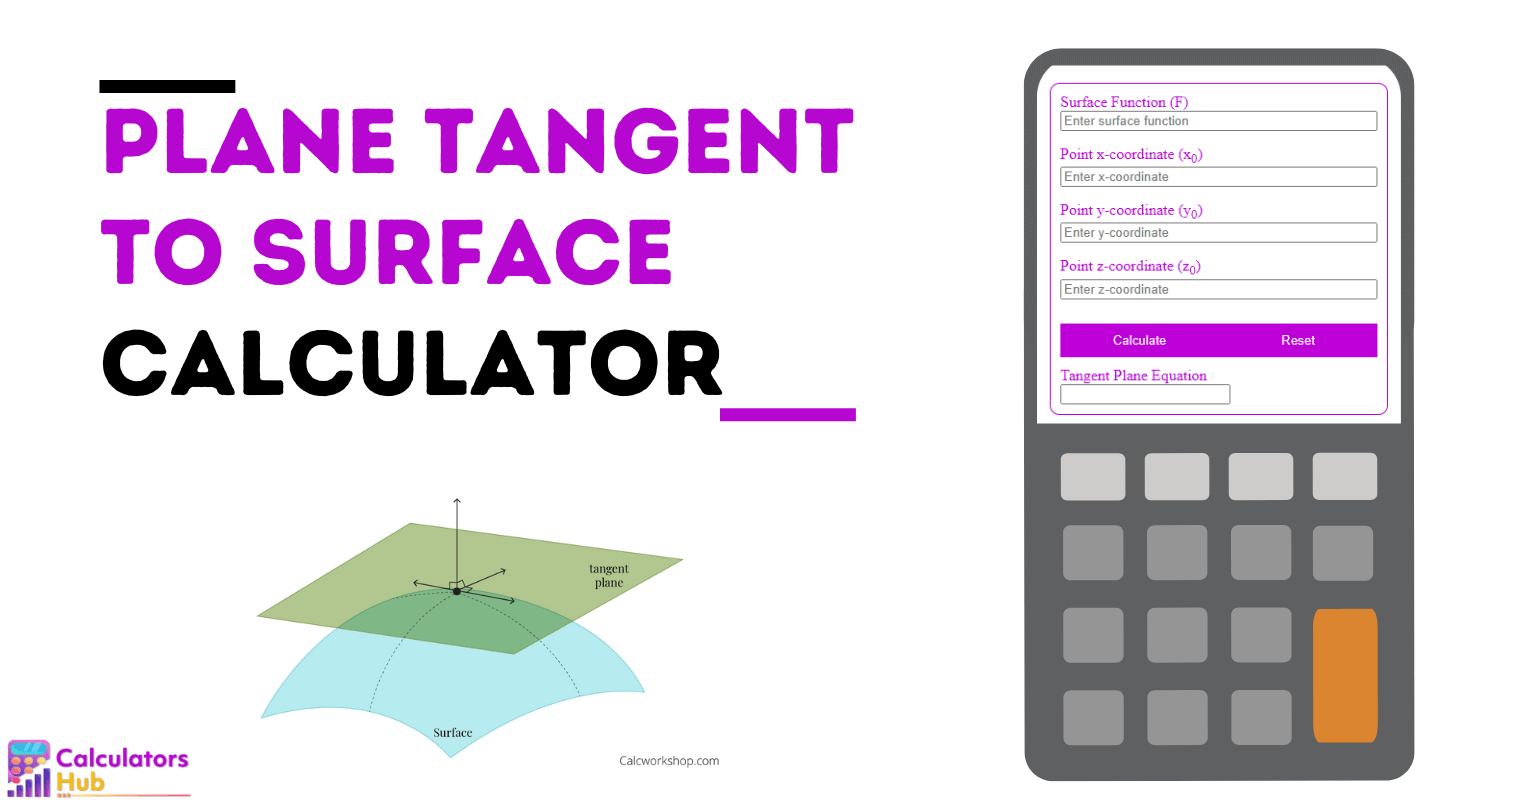 Plane Tangent to Surface Calculator